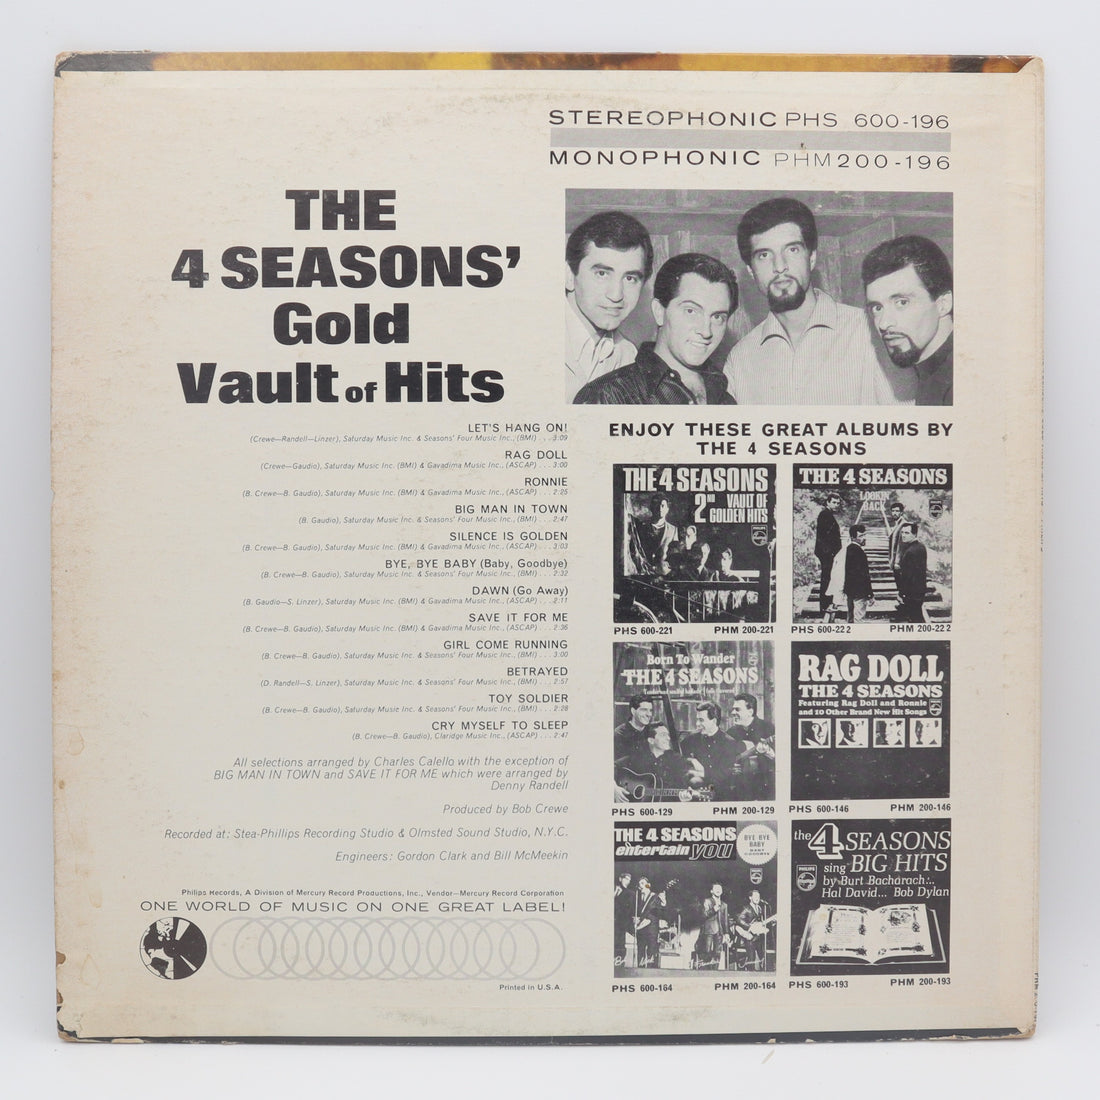 The 4 Seasons' Gold Vault of Hits